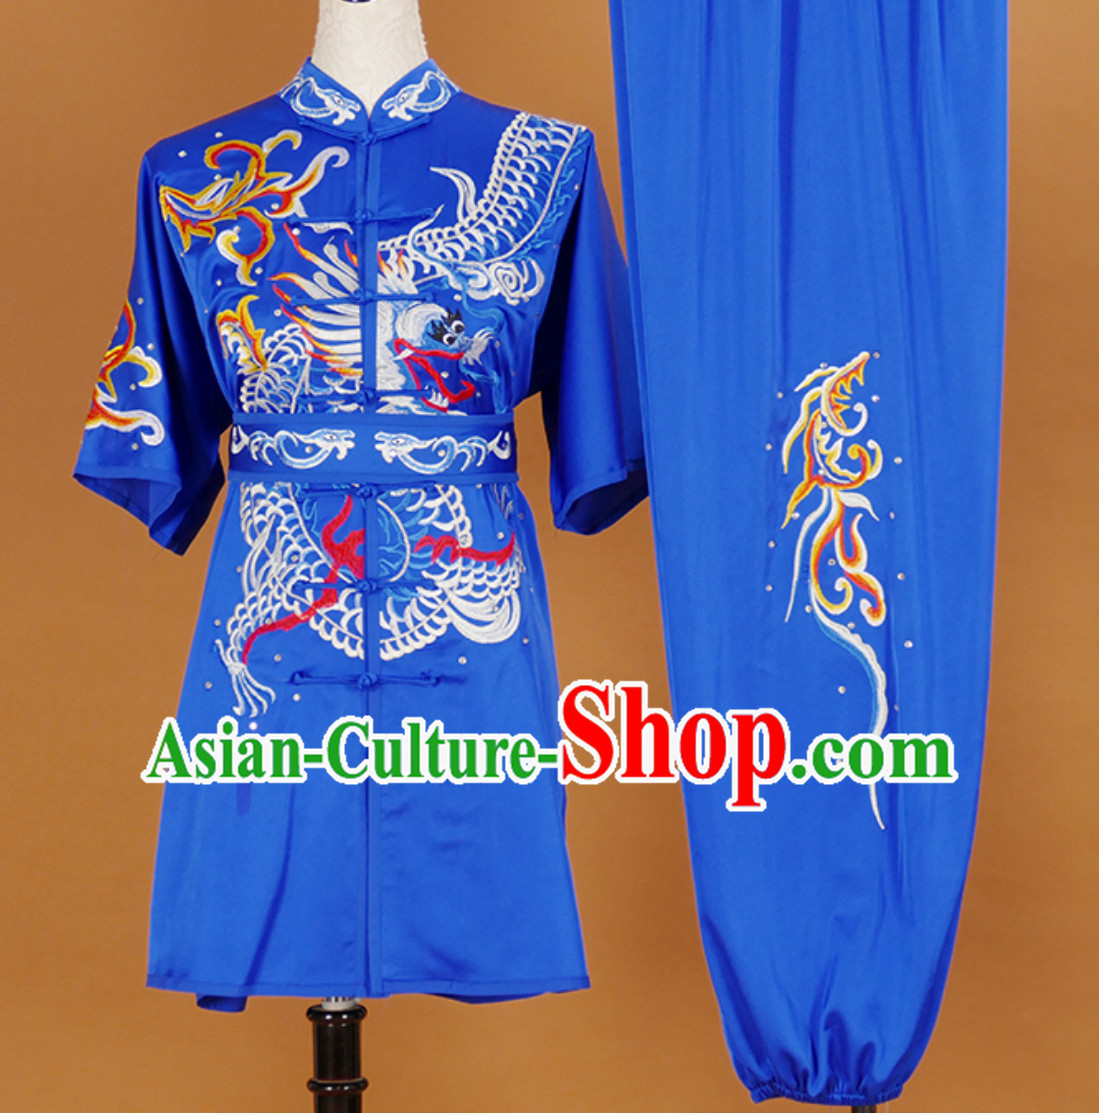 Blue Short Sleeves Martial Arts Suit Kung Fu Dress Wushu Suits Stage Performance Competition Full Set